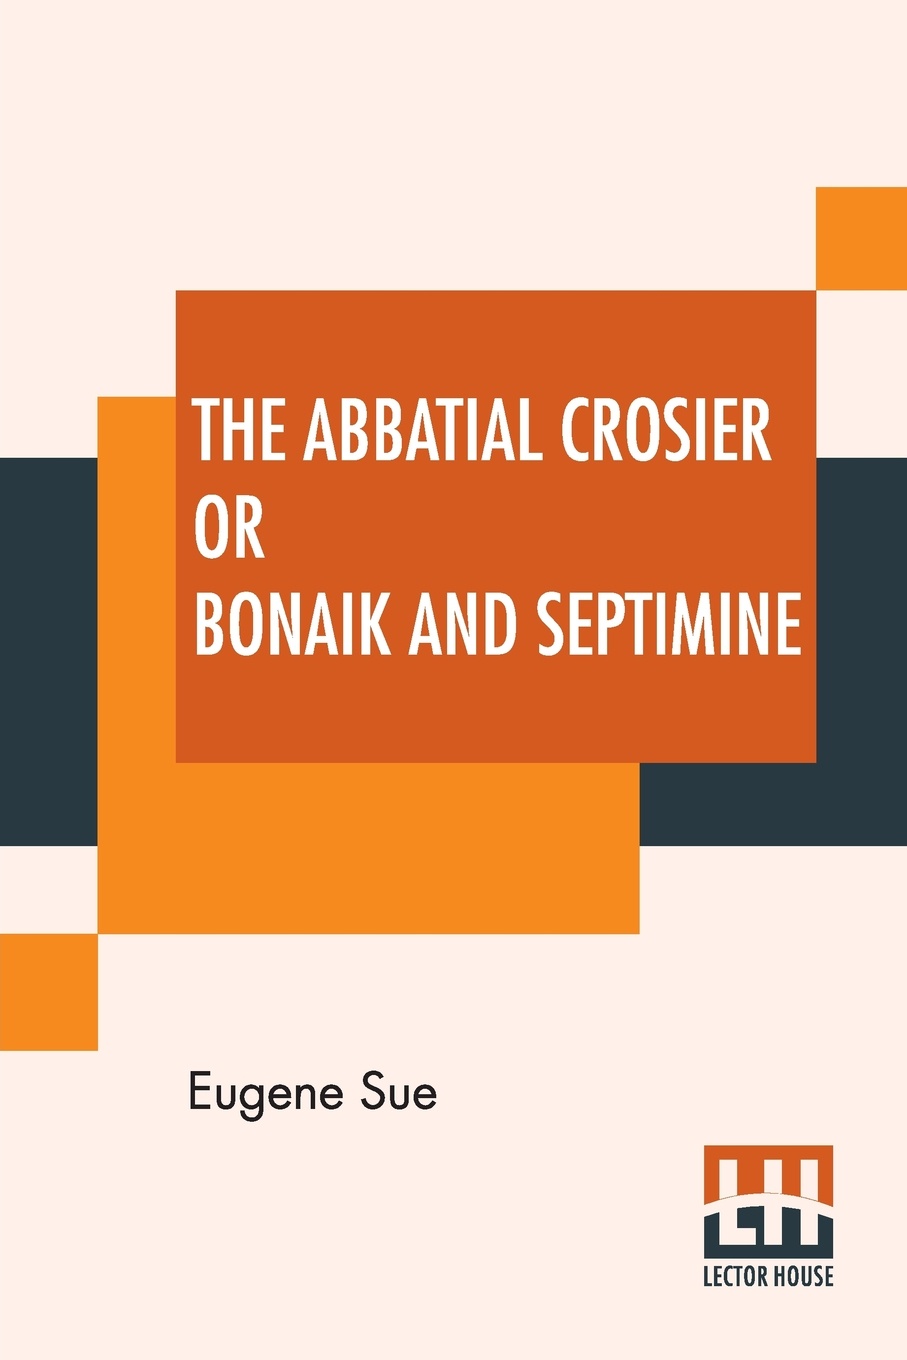 The Abbatial Crosier Or Bonaik And Septimine. A Tale Of A Medieval Abbess By Eugene Sue Translated From The Original French By Daniel De Leon